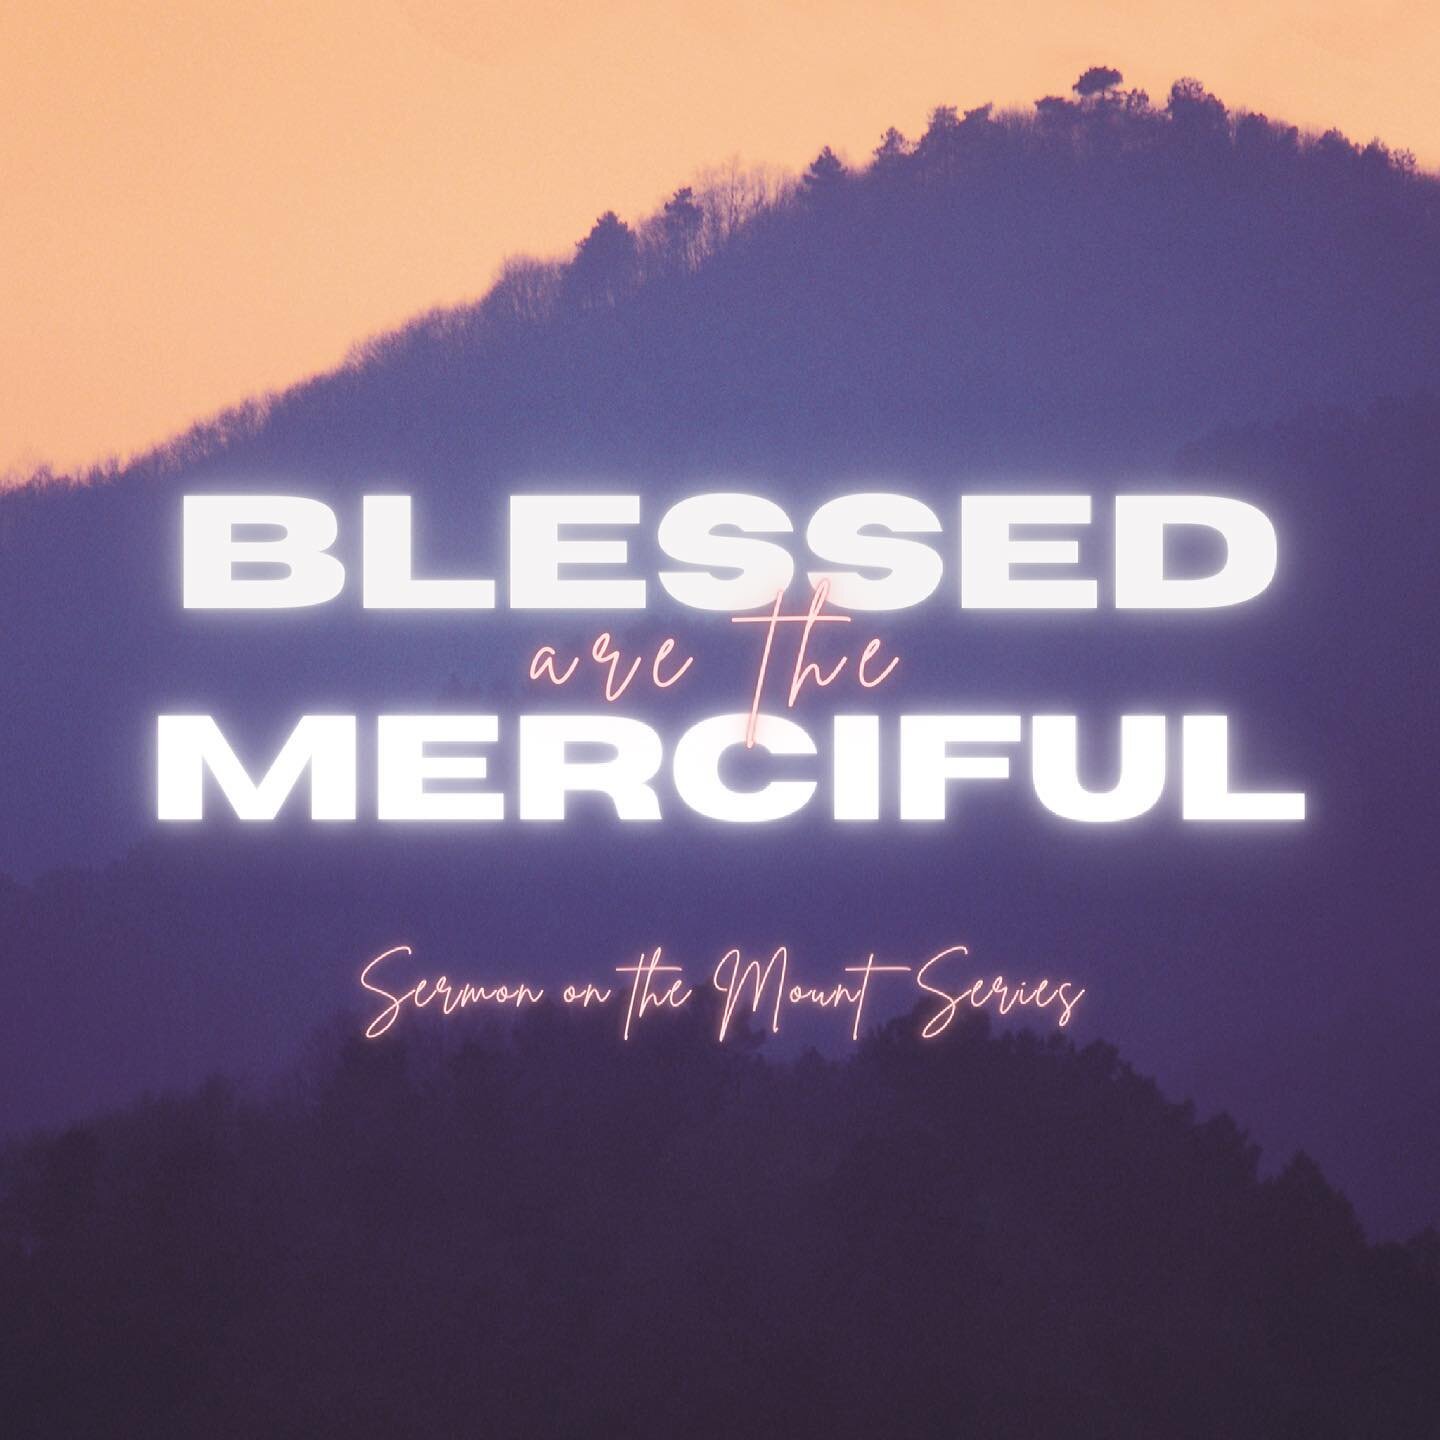 For they shall receive mercy! 🖤 We could all use some mercy right now, and the challenge to be merciful is super relevant in our word today. Join us tonight on zoom for bible talk at 7pm, message us for the link!